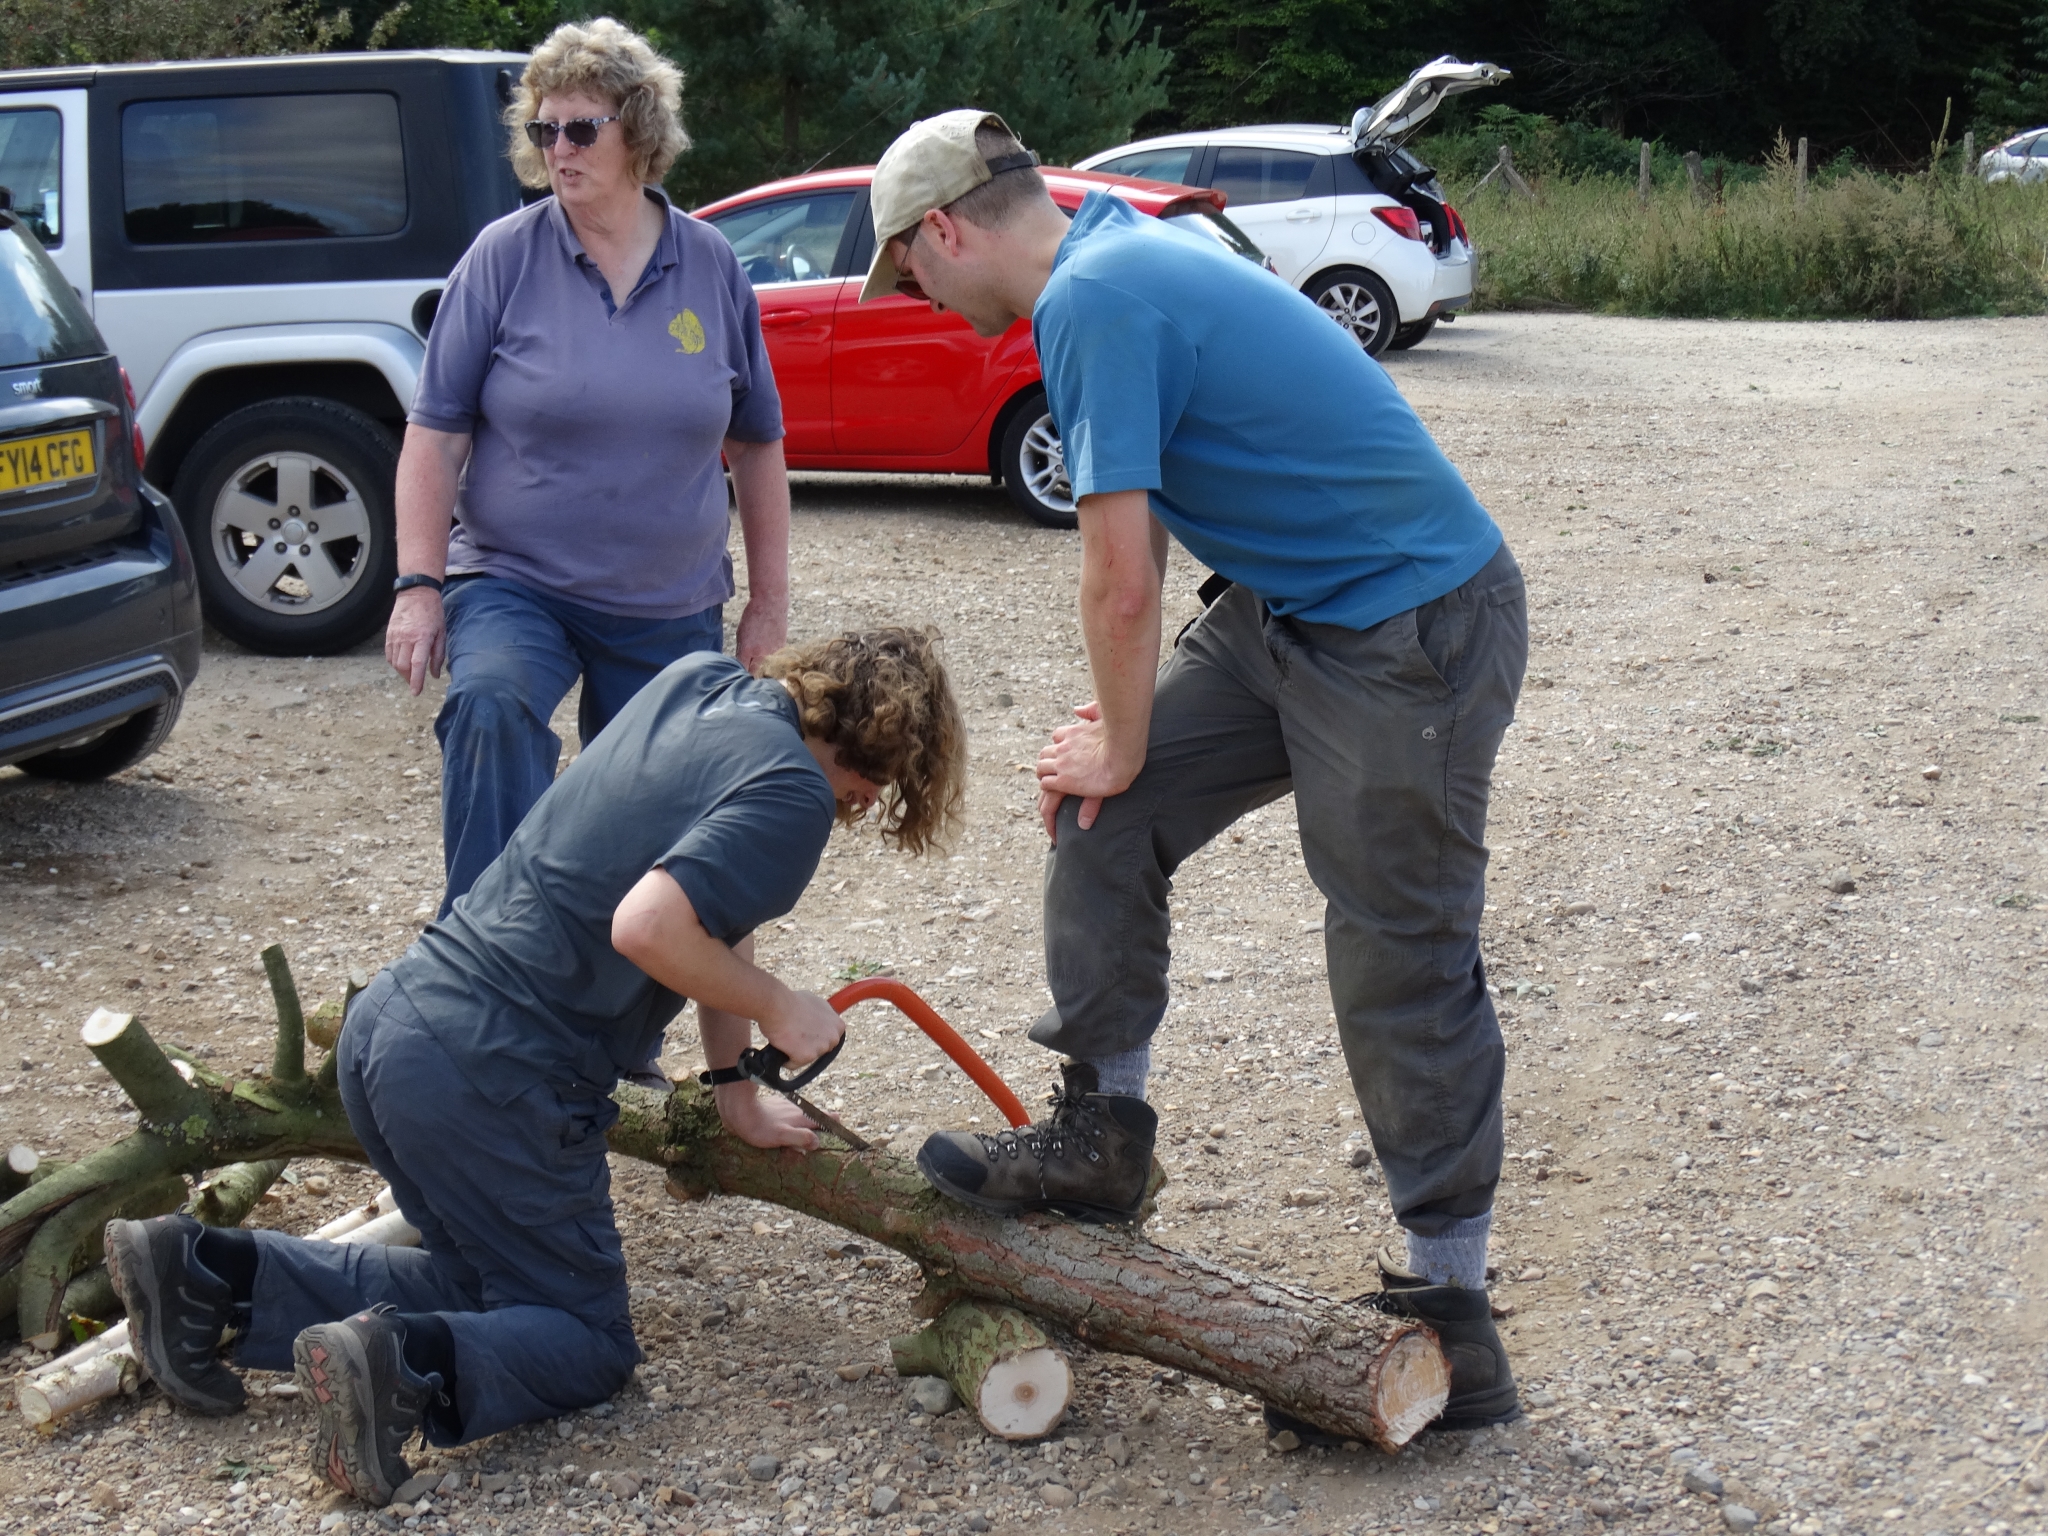 A photo from the FoTF Conservation Event - September 2019 - Scrub Clearance at Cranwich Camp : A volunteer saws a large log, while two other volunteer hold the log steady with their feet